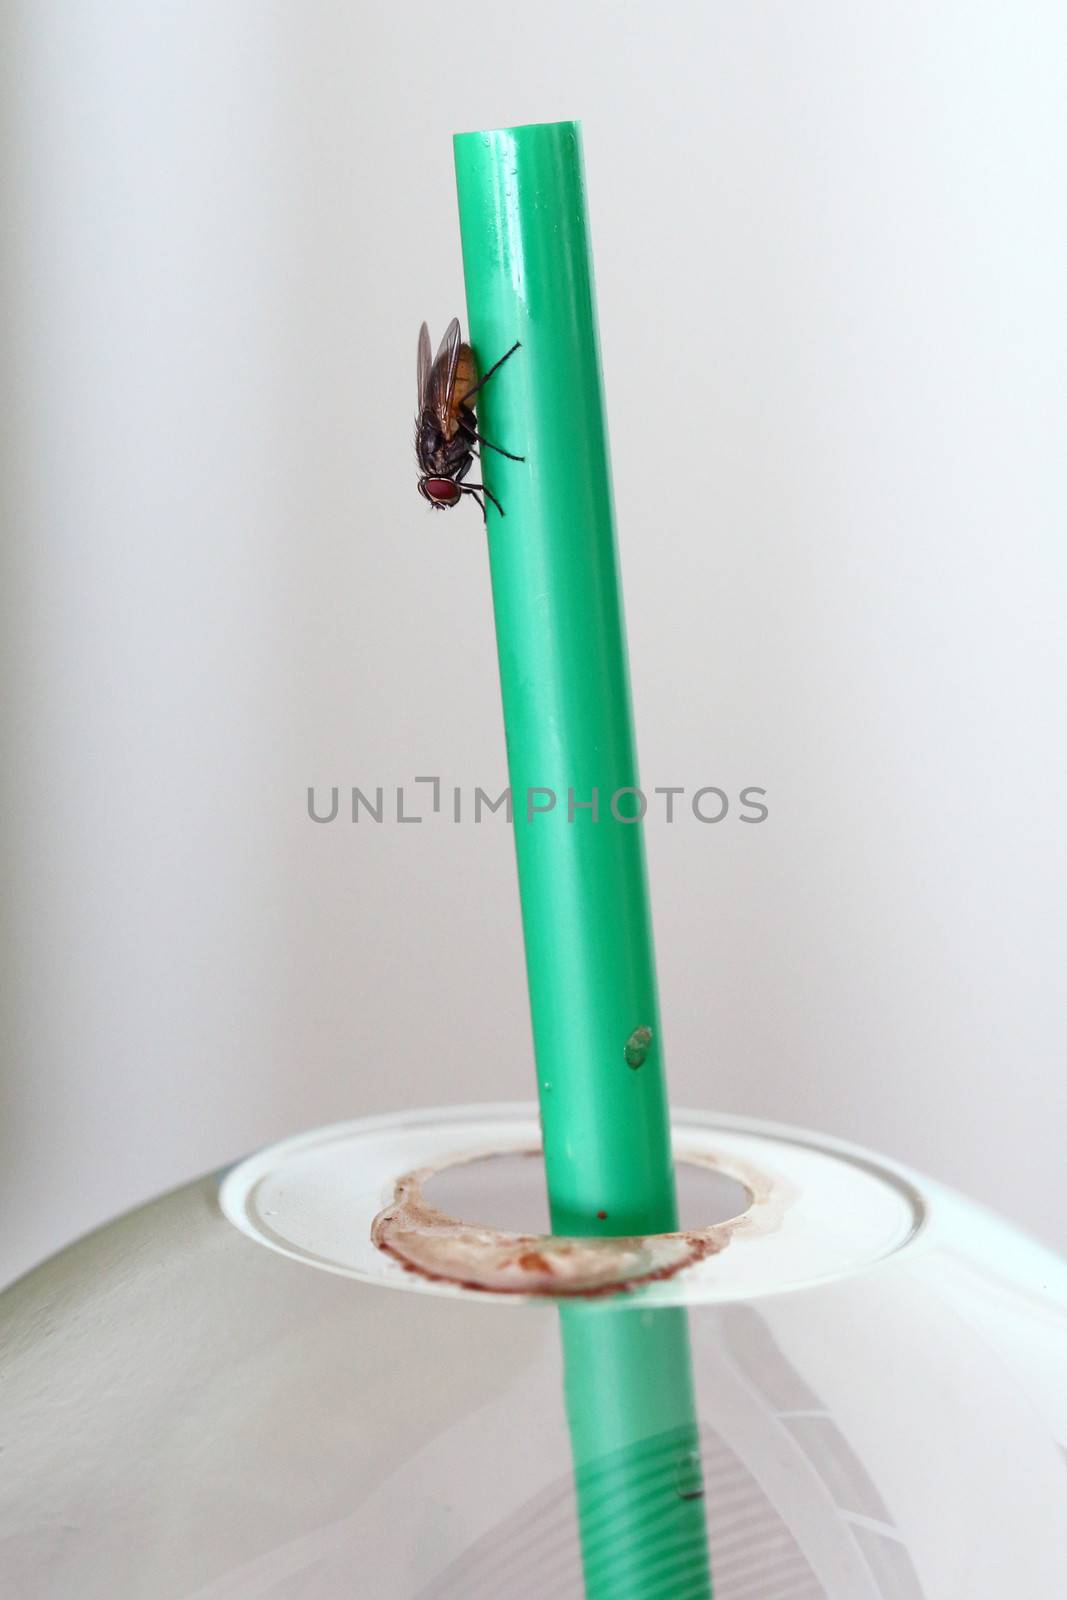 Dirty fly on coffee cup straw